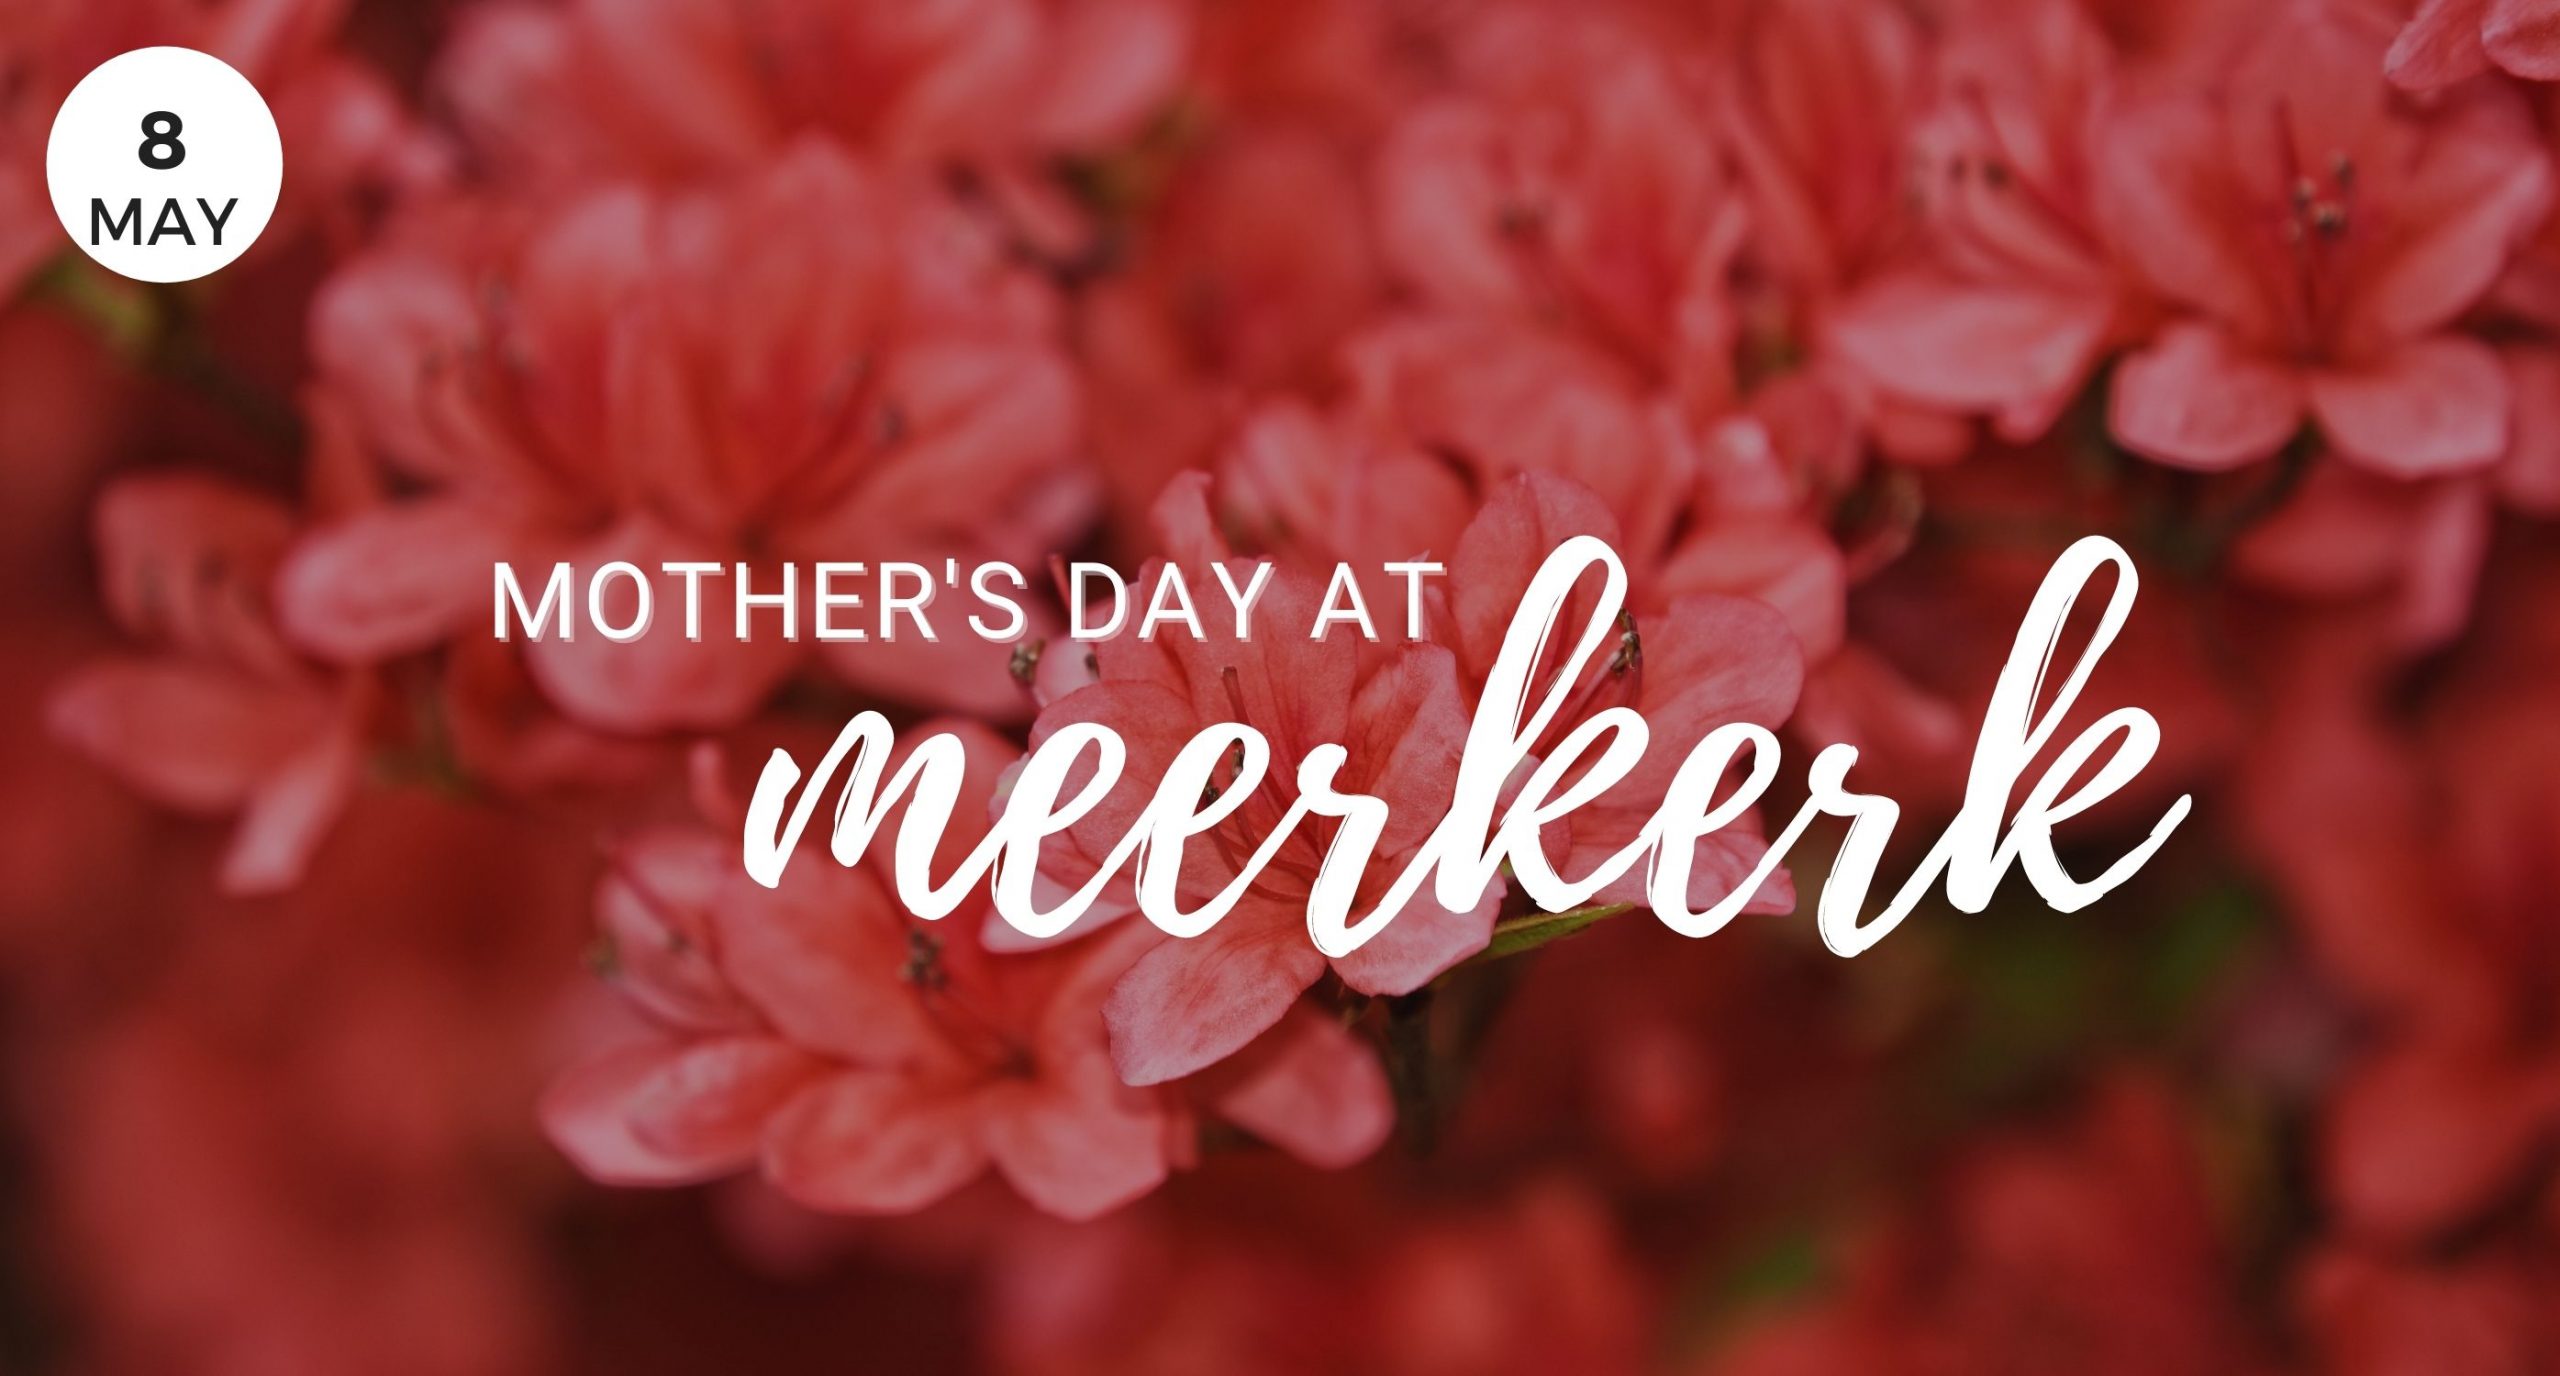 Mothers day, Meerkerk, gardens, flowers, rhododendron, red, event, Windermere Oak Harbor Wa, Mothers day Whidbey Island